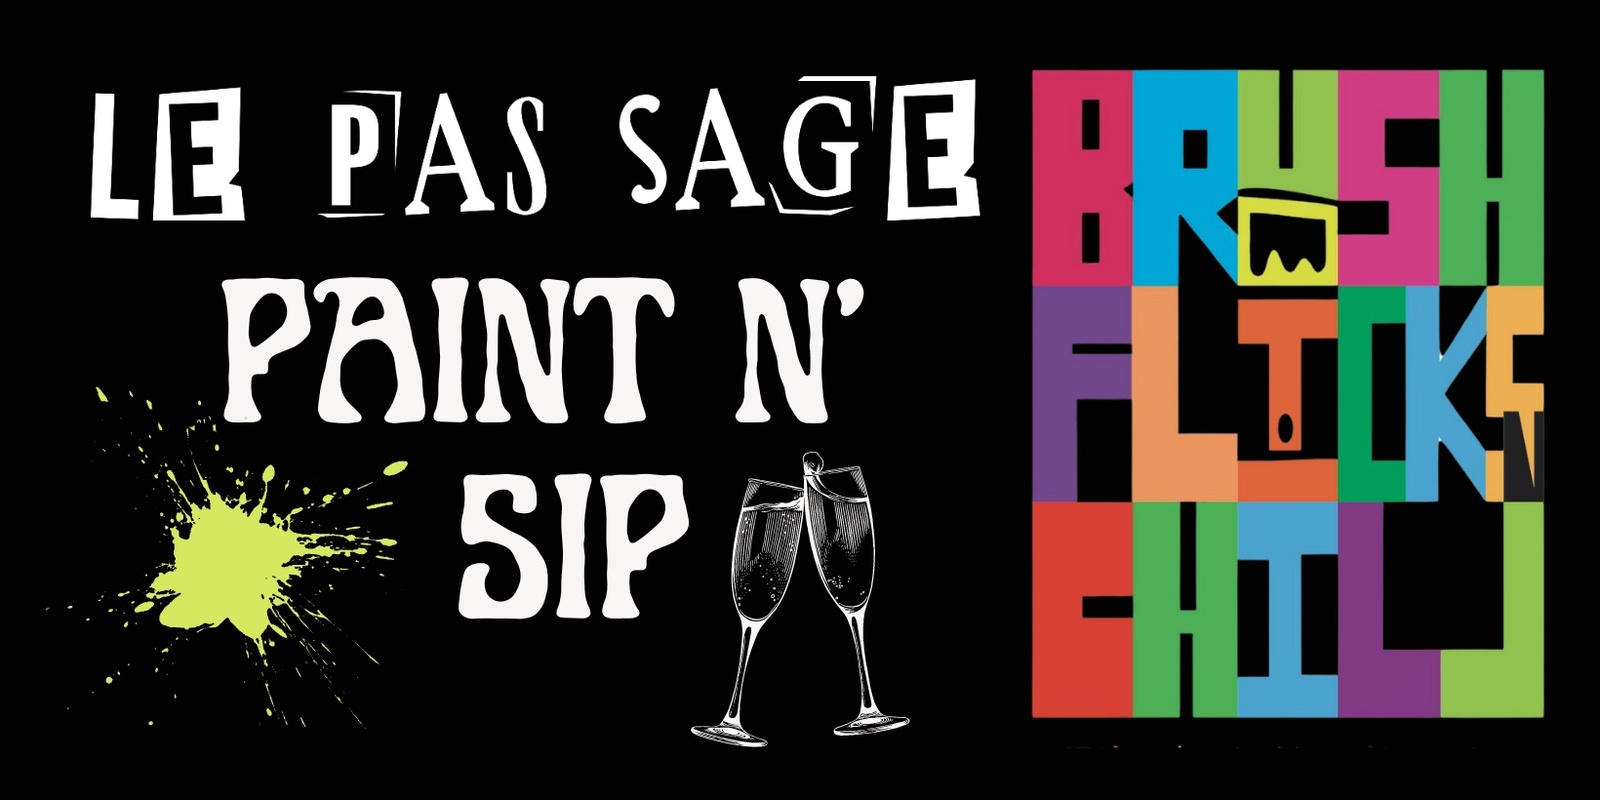 Banner image for Paint n' Sip at Le Pas Sage